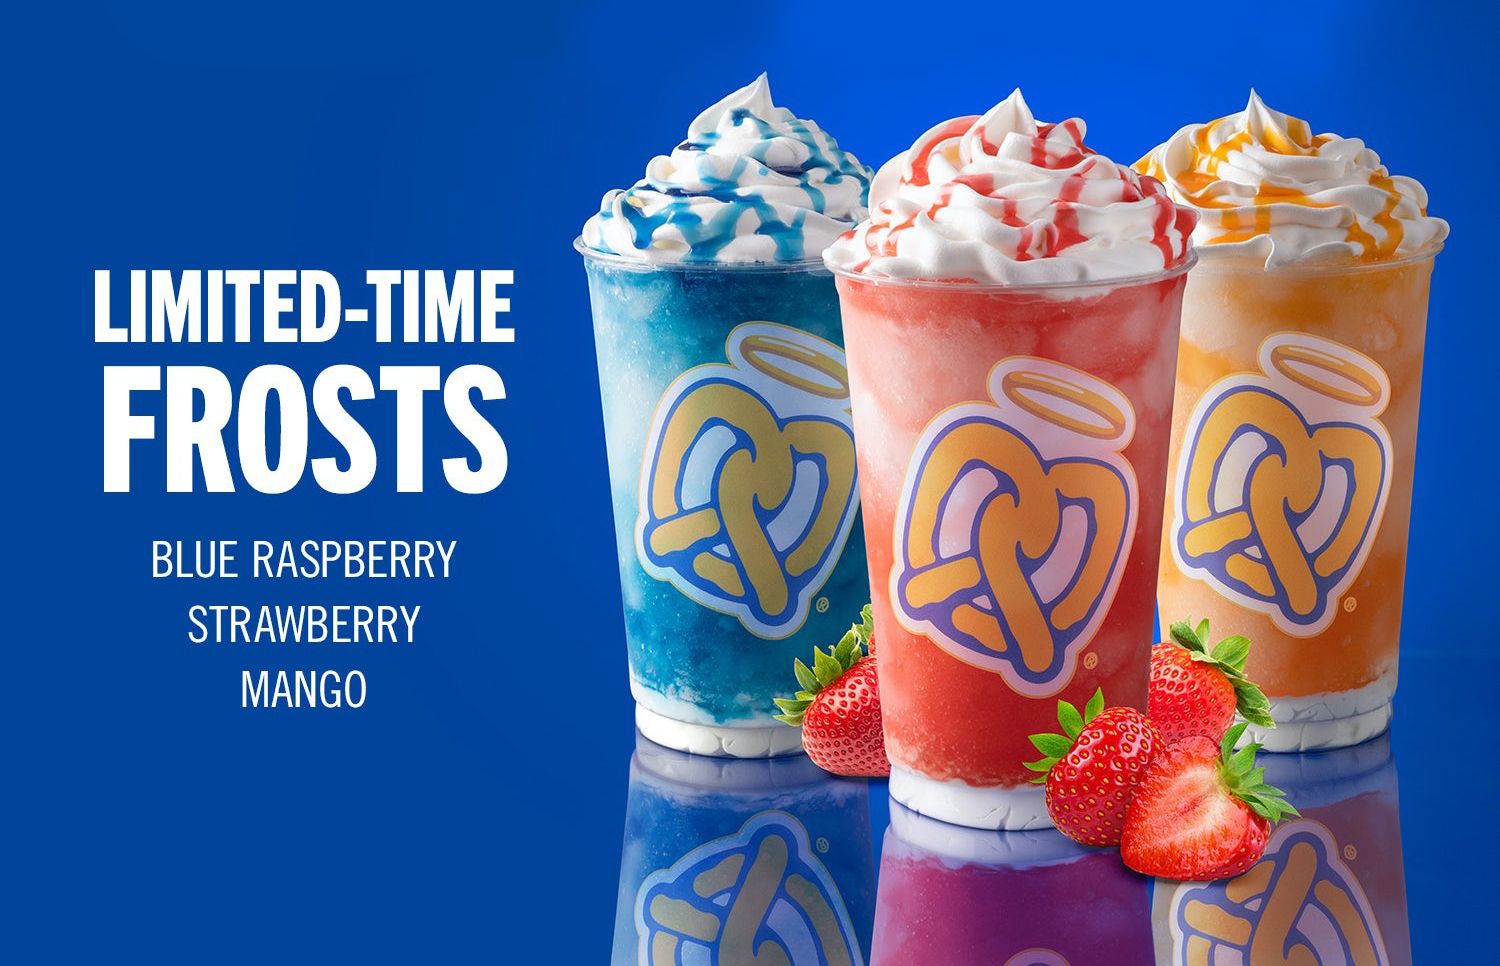 Auntie Anne’s Pretzels Brings Back their Classic Blue Raspberry, Mango and Strawberry Lemonade Frosts